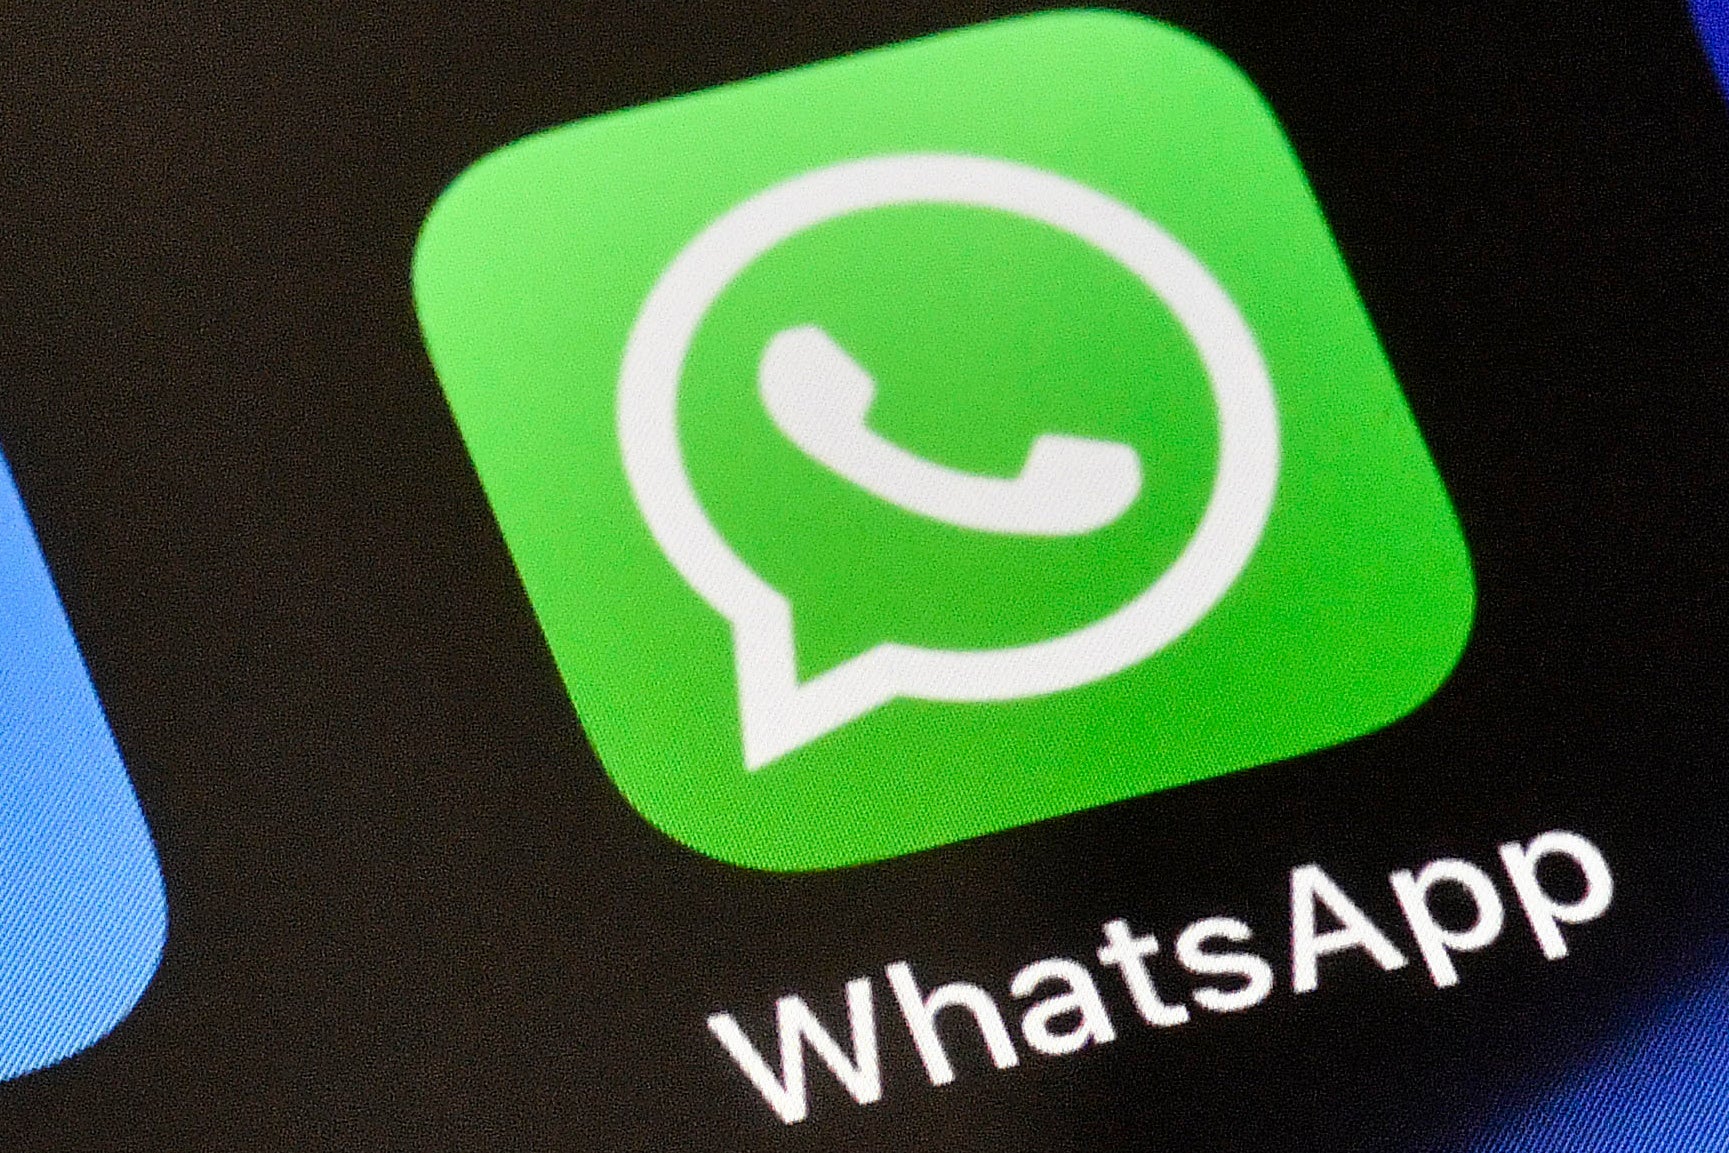 The trial stemmed from charges brought in 2022 that Munir shared blasphemous content on WhatsApp